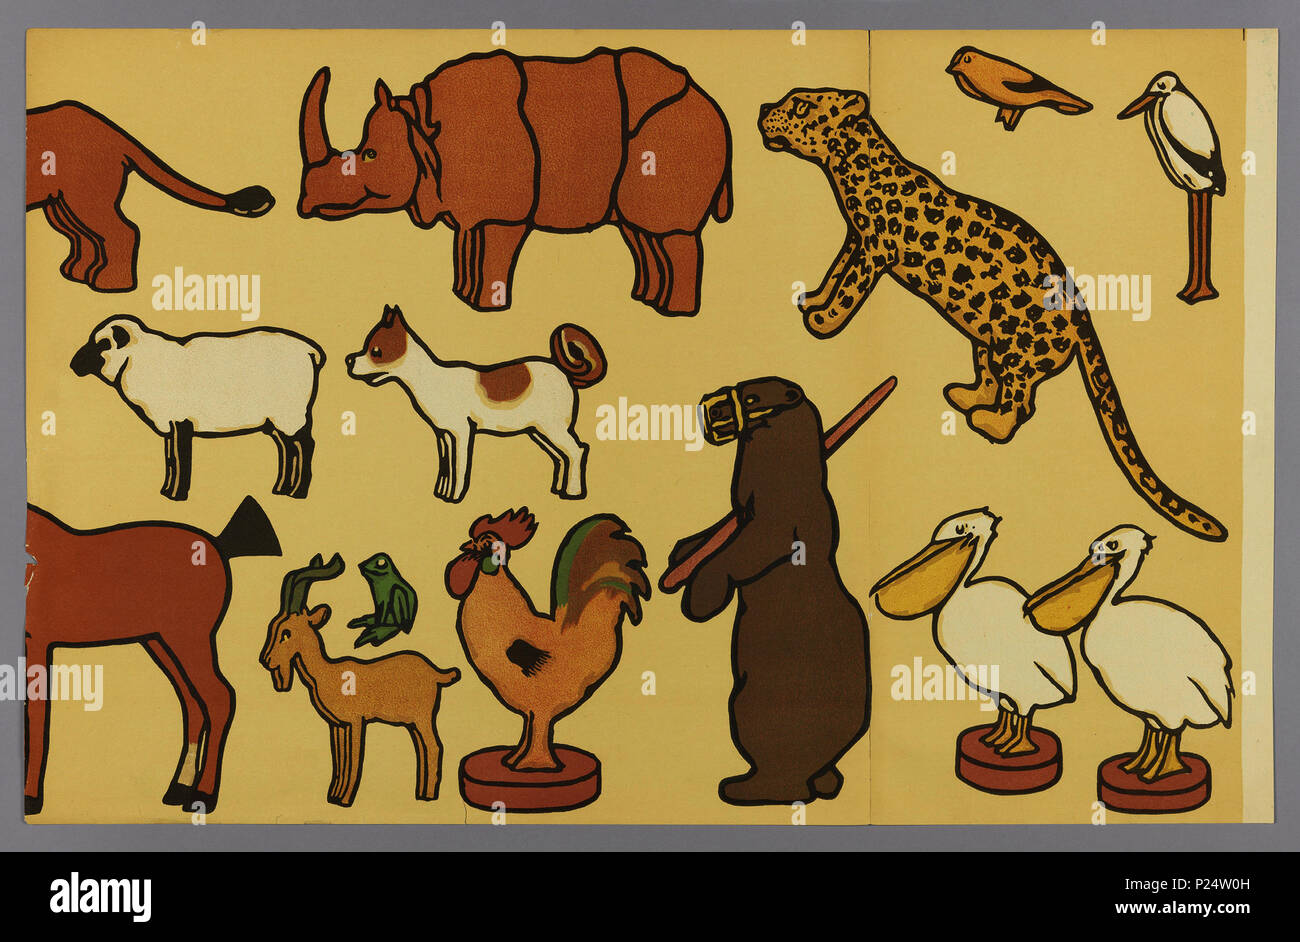 .  English: Frieze - Cut Outs, Jungle Cut Outs, 1906 .  English: Children's frieze, containing various animals, including dog, sheep, goat, pelican, rhinoceros and leopard. Printed in colors on a tan ground. The paper can be installed as is forming a frieze or the animals can be cut out and pasted on the wall or pinned to a fabric wallcovering. . 1906 129 Frieze - Cut Outs, Jungle Cut Outs, 1906 (CH 18431557) Stock Photo